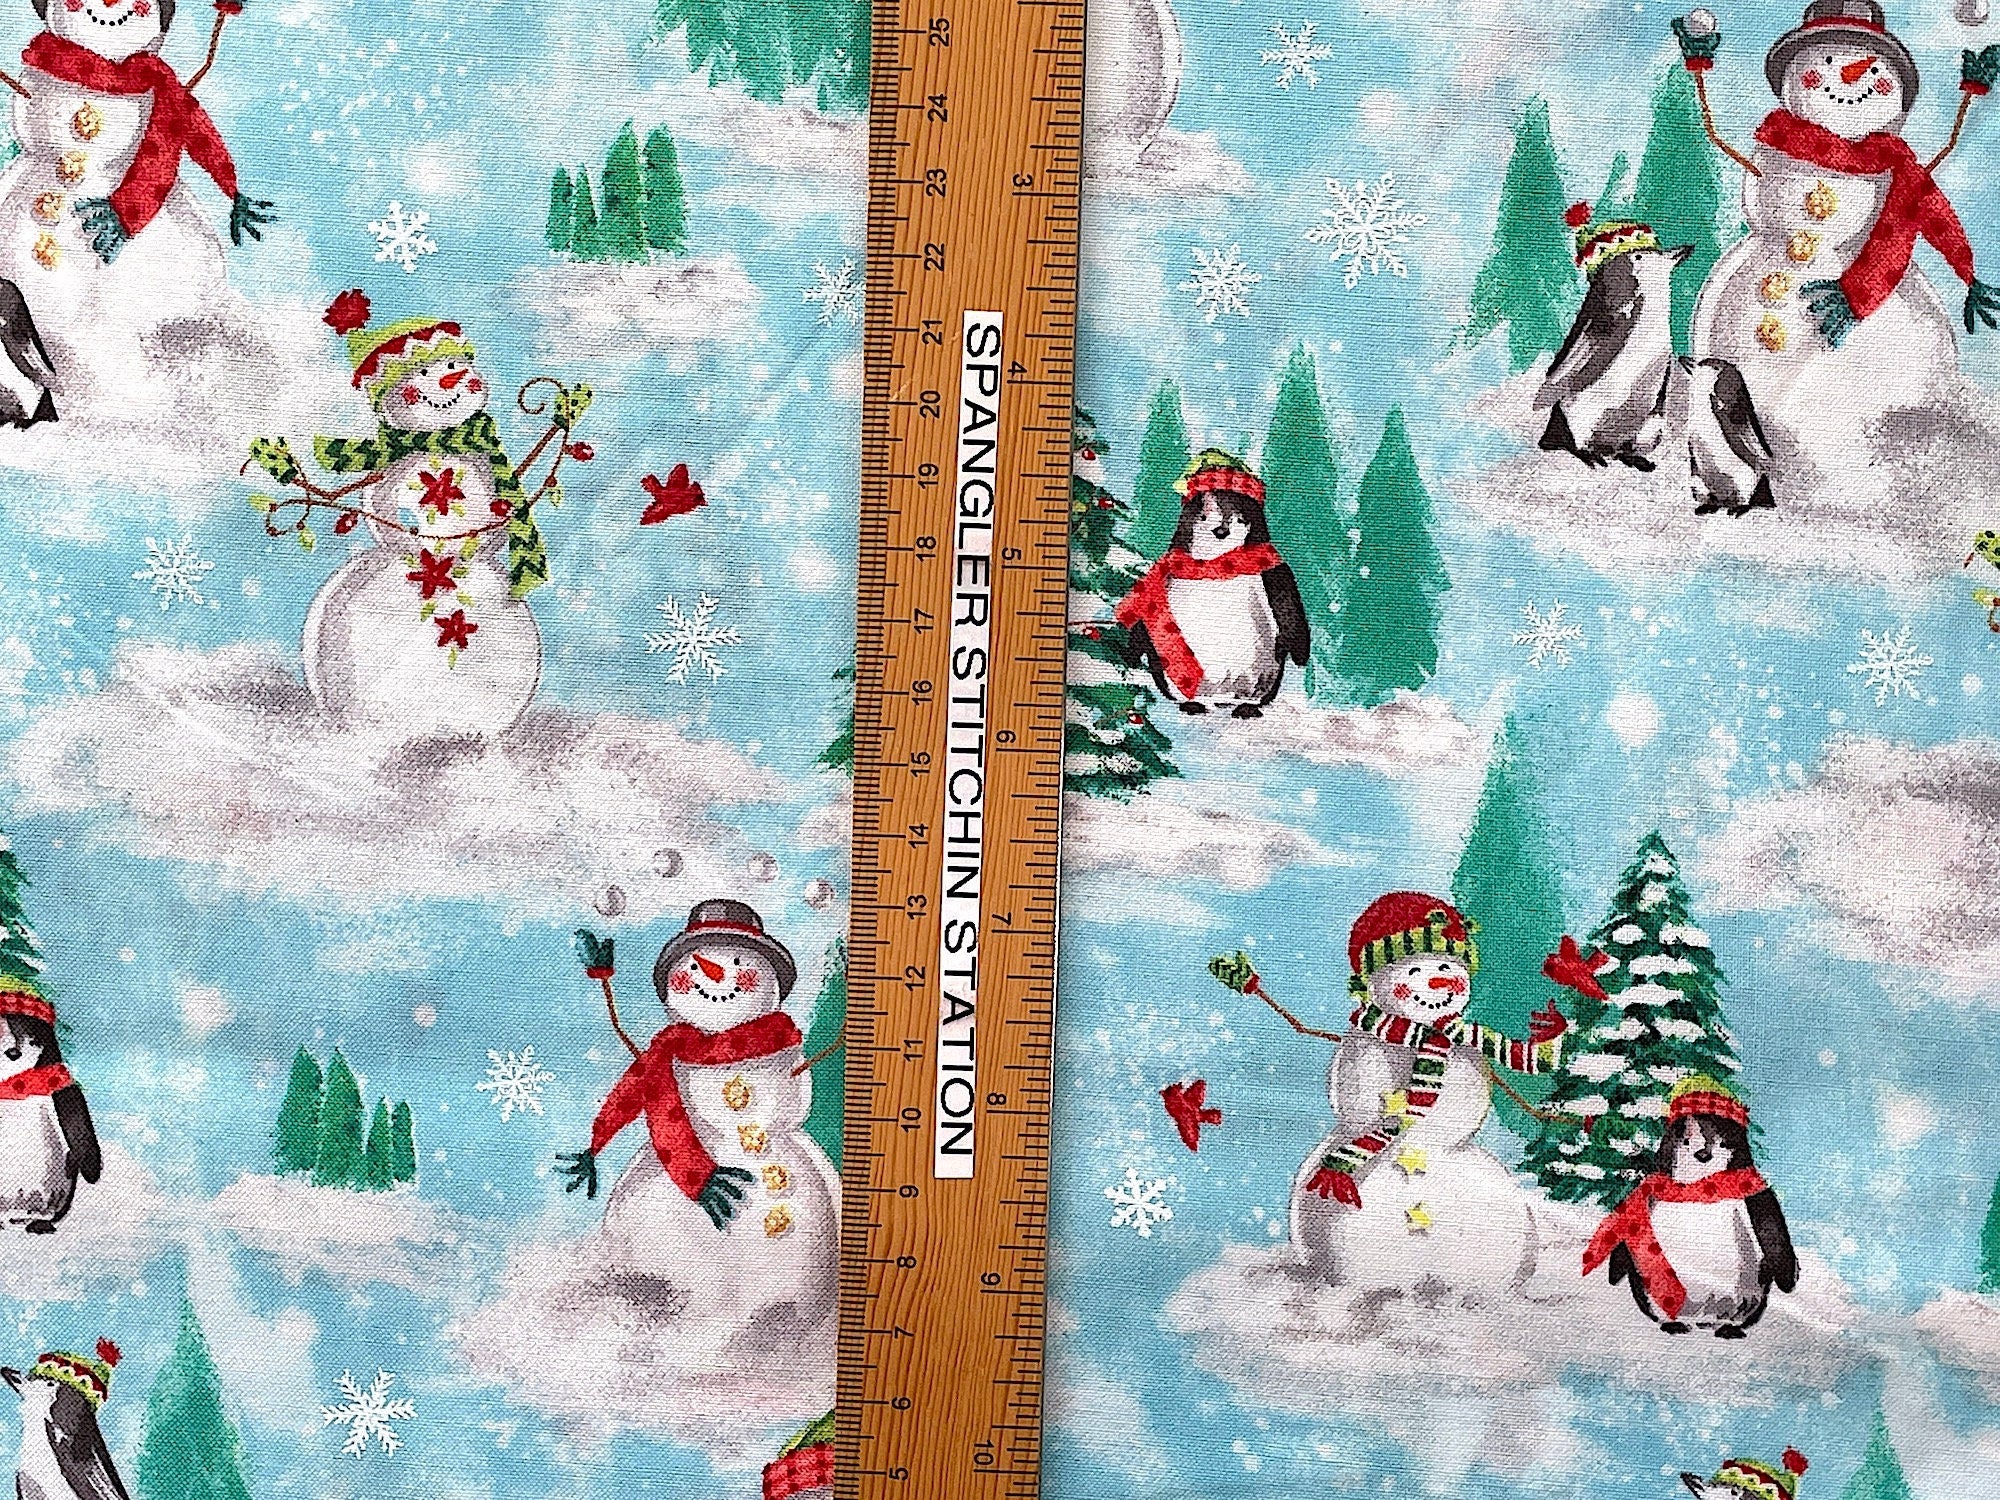 Ruler on fabric to show height of snowmen and penguins.